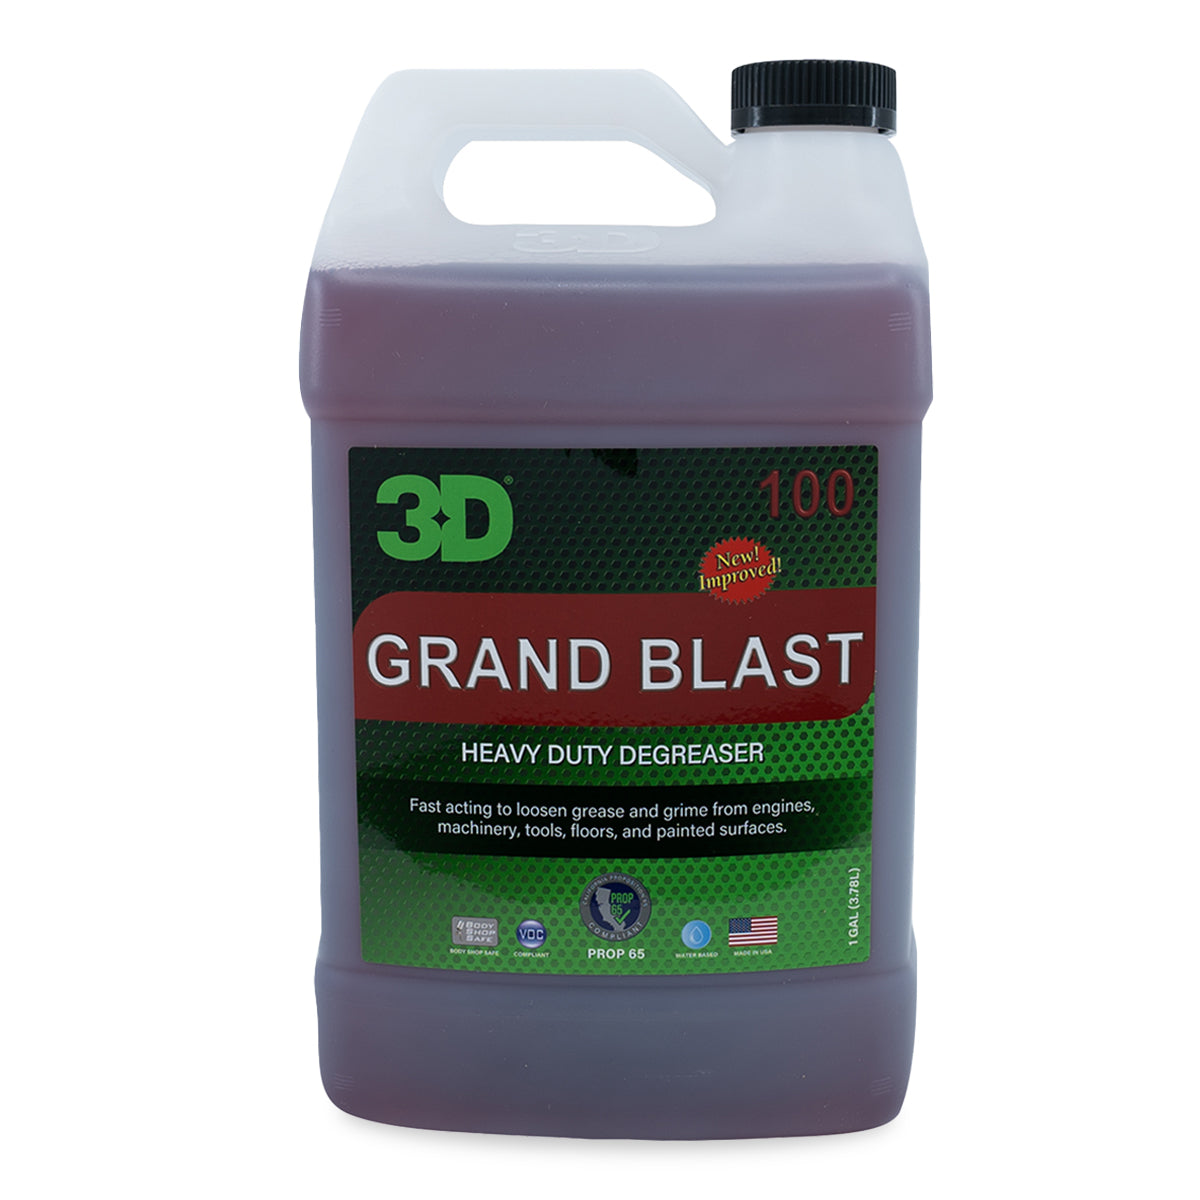 Thunder Blast™ Degreaser, Specialty Products